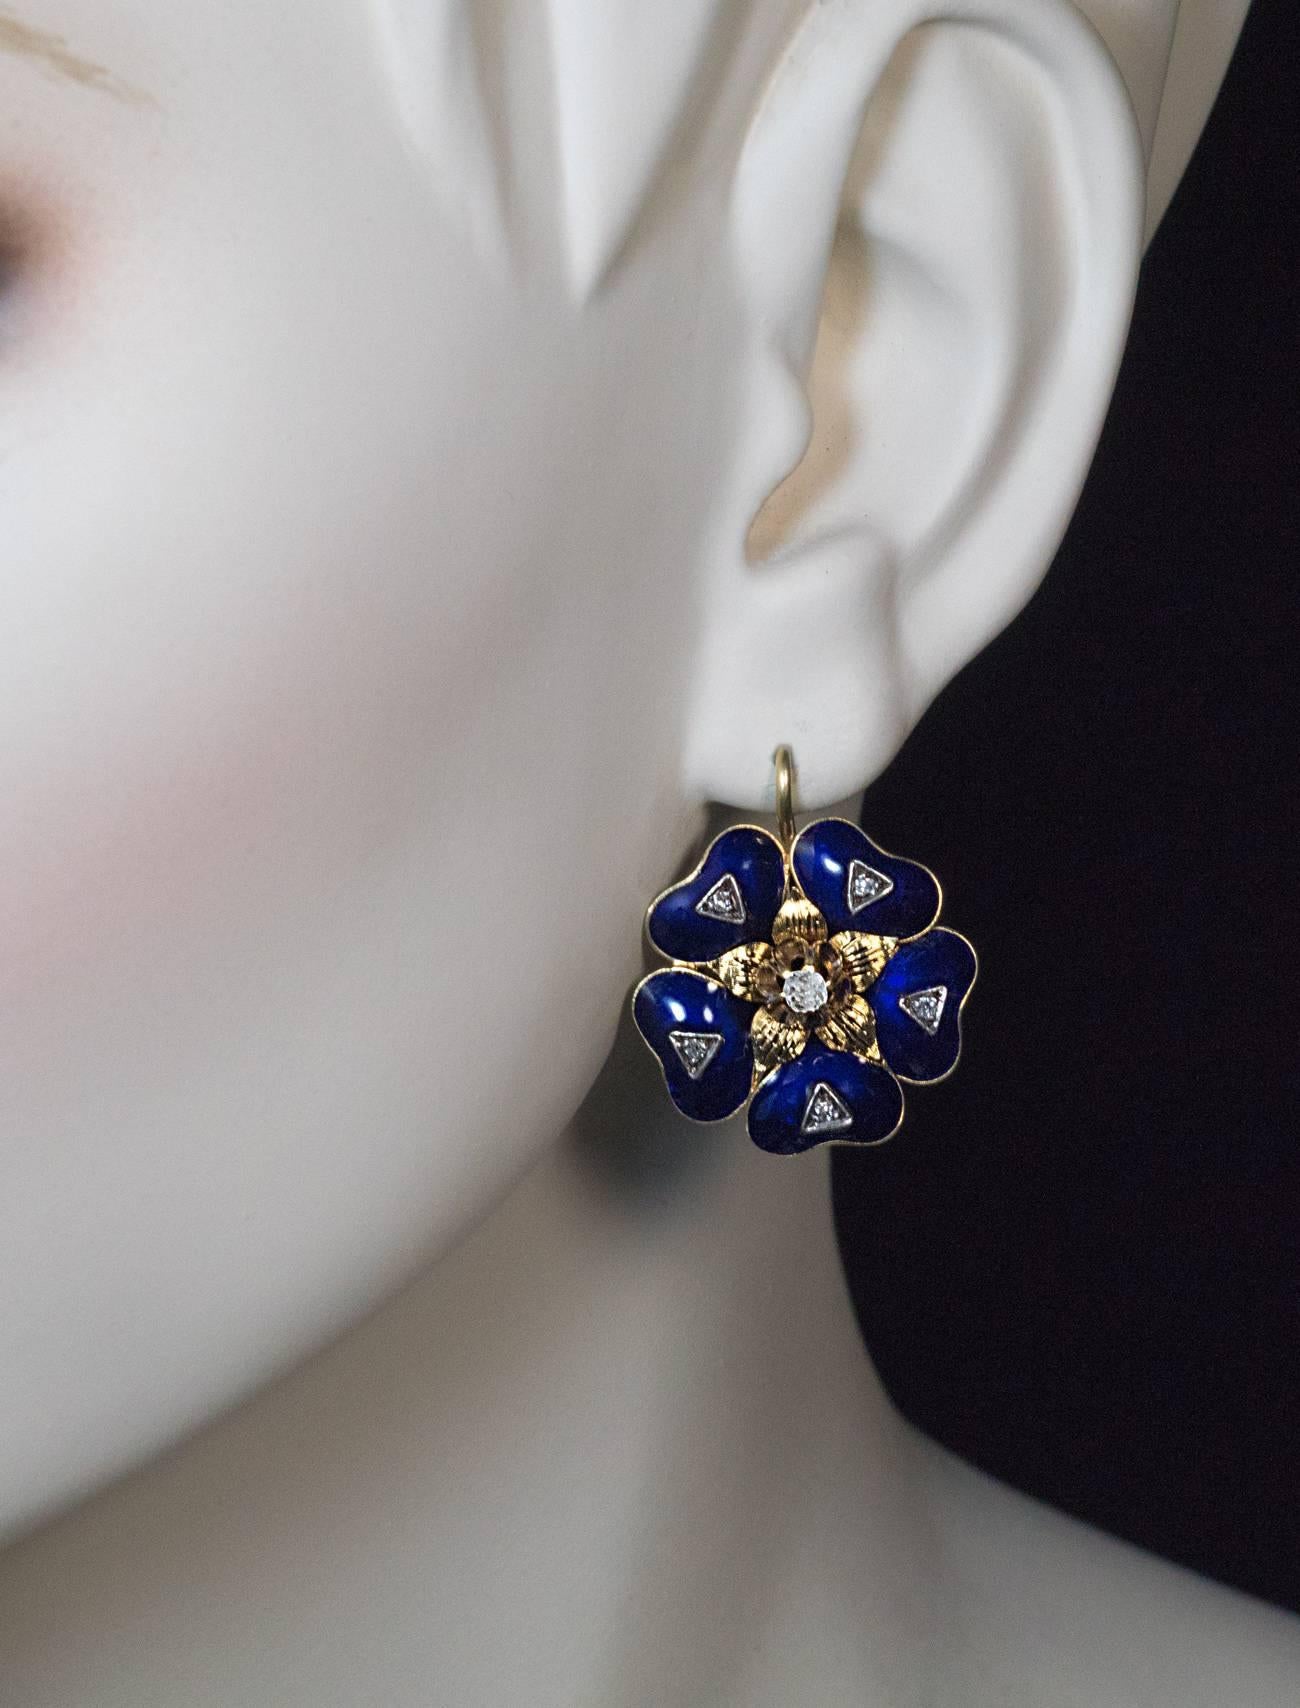 circa 1880

18K gold Victorian era earrings are finely modeled as stylized flower heads covered with royal blue enamel and embellished with old mine cut diamonds

total diamond weight 0.35 ct

width 24 mm (15/16 in.)

length with ear wire 29